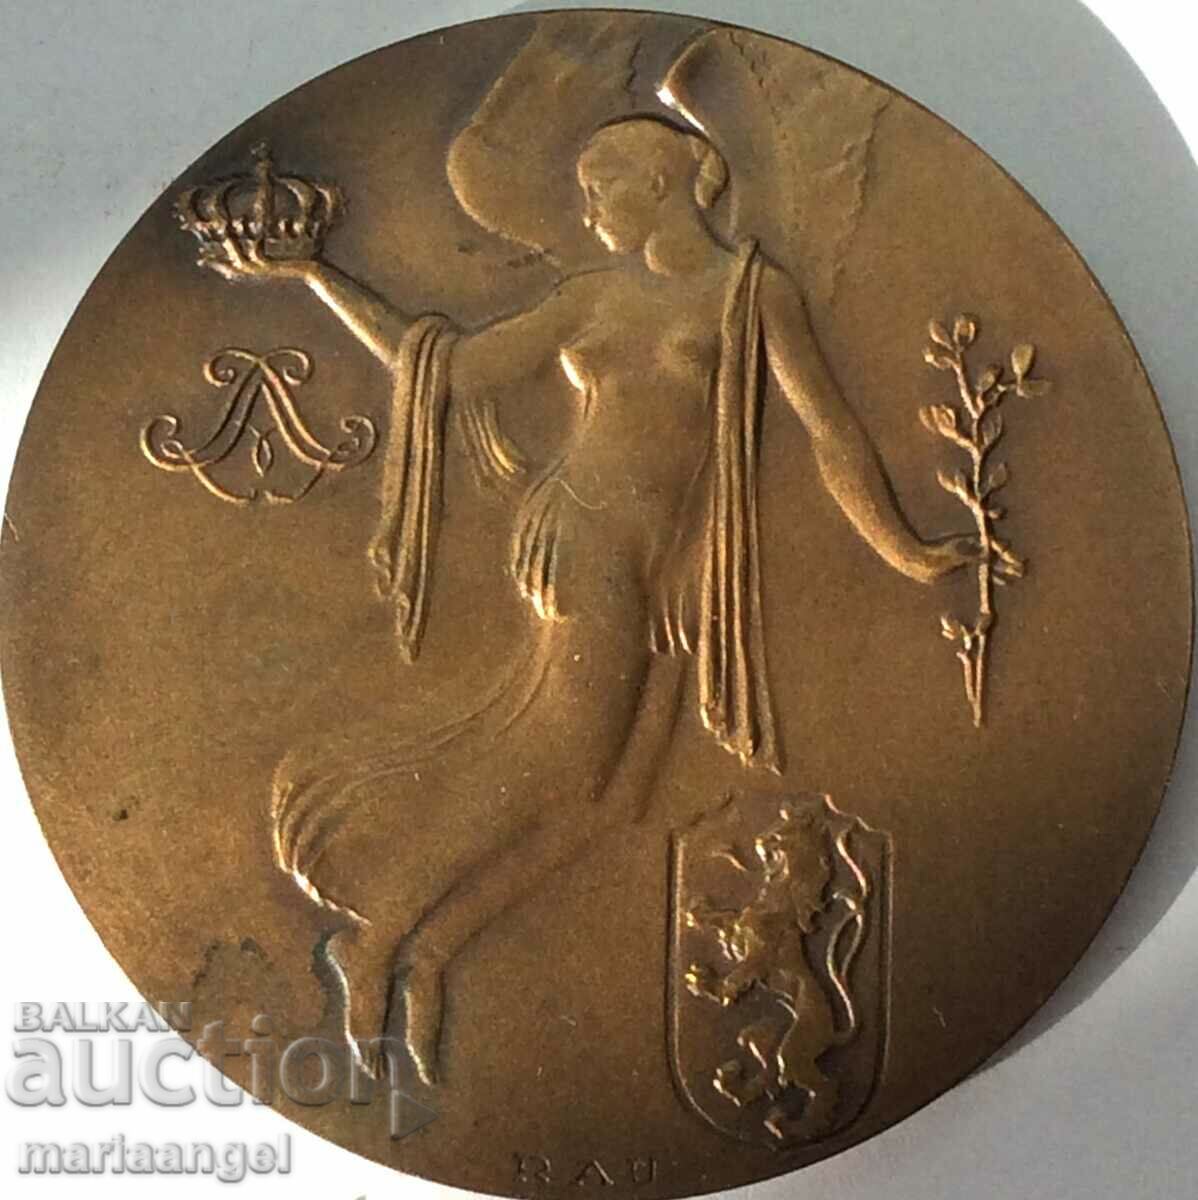 Belgium medal "100 years of the kingdom" 50mm 48g bronze